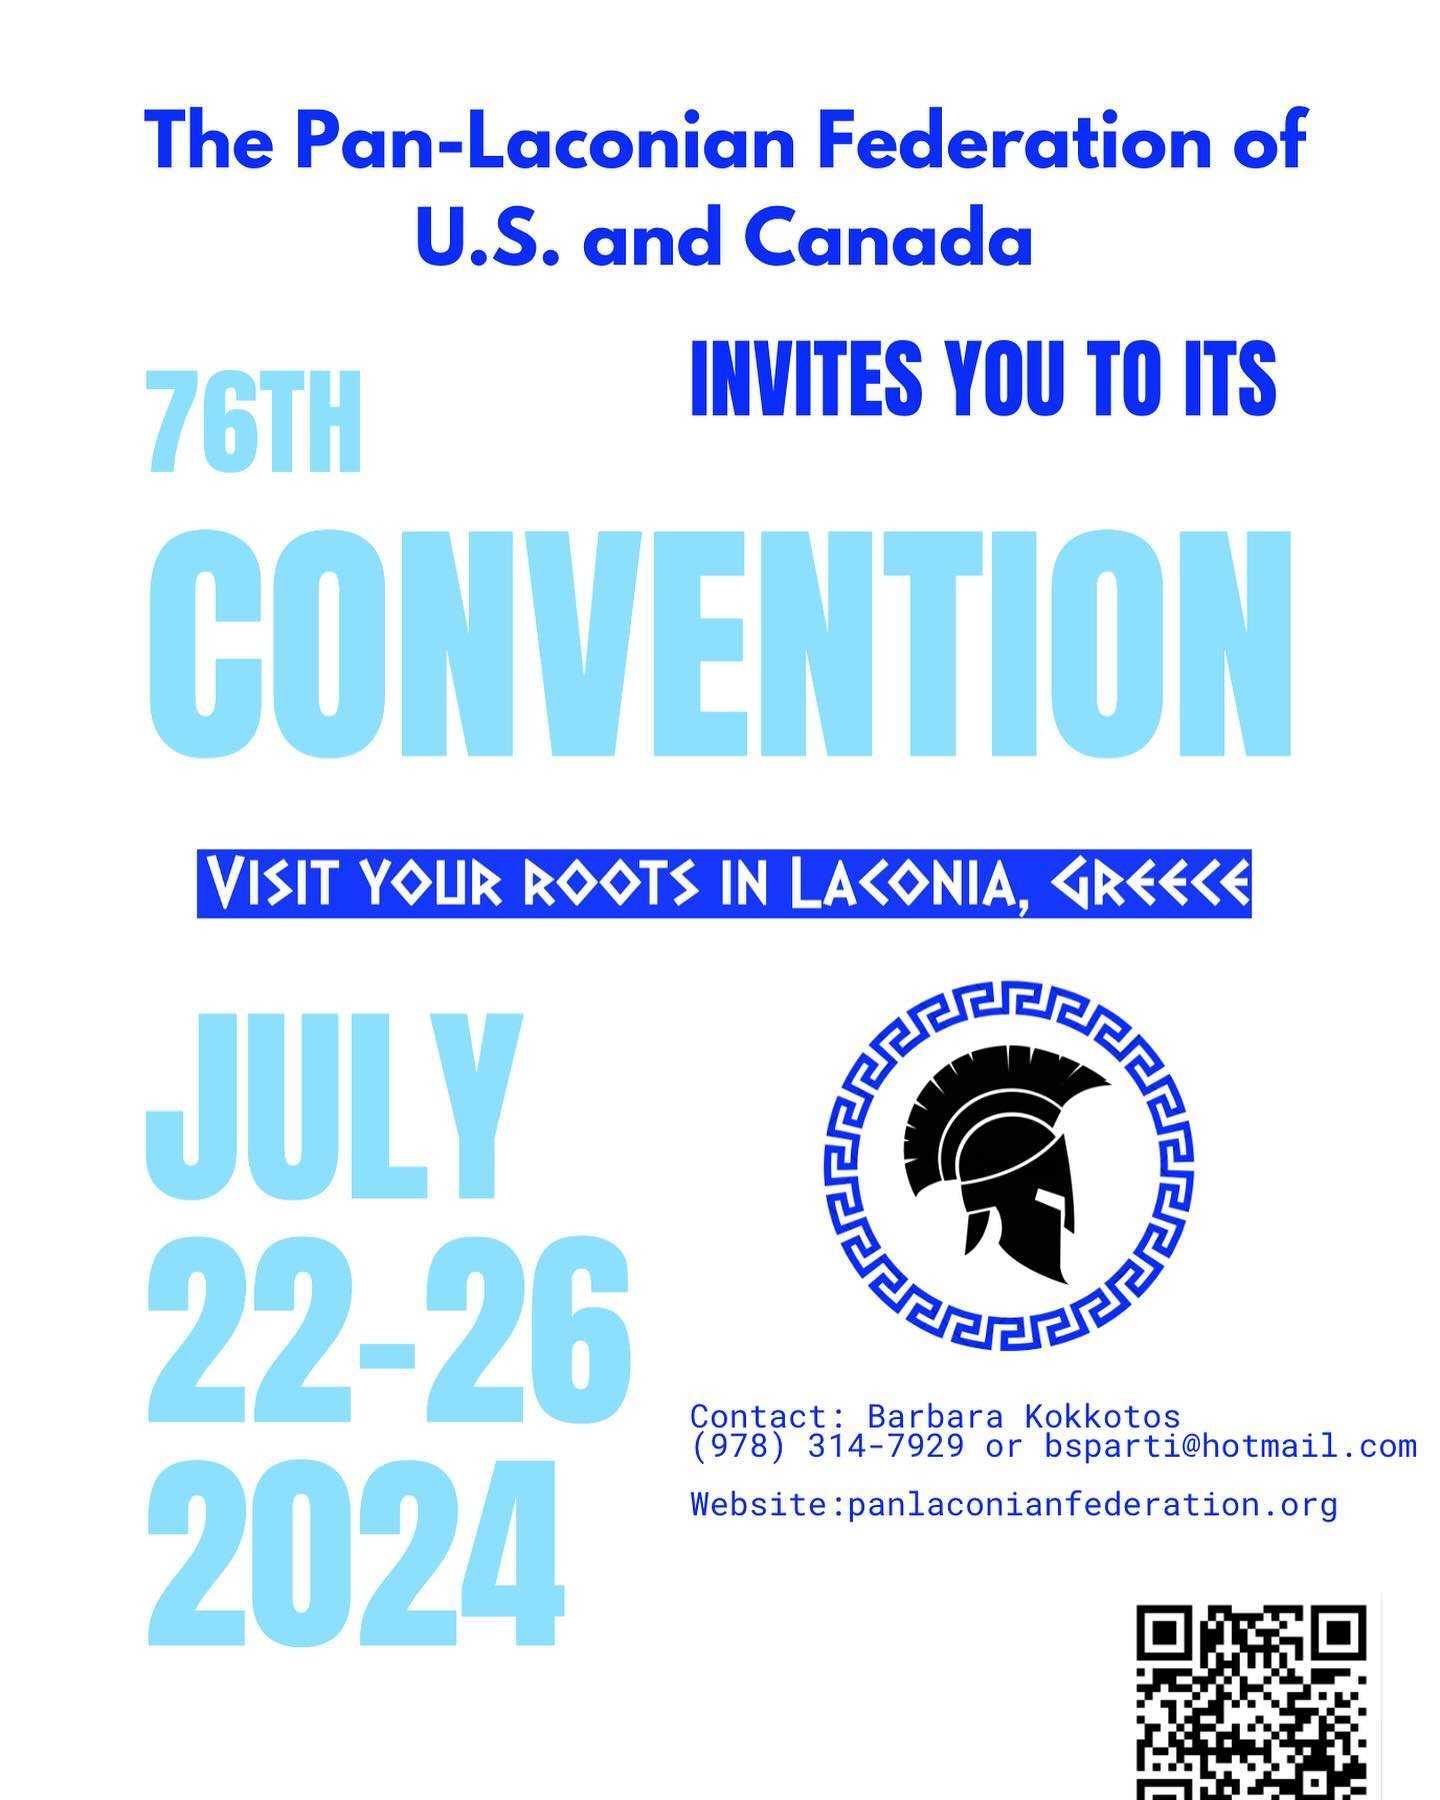 Exciting activities planned all over our beautiful region of Laconia for our Pan-Laconian Convention this summer! See the latest itinerary below!!! Click in our bio to RSVP! Hope to see you there 🇬🇷🇬🇷🇬🇷